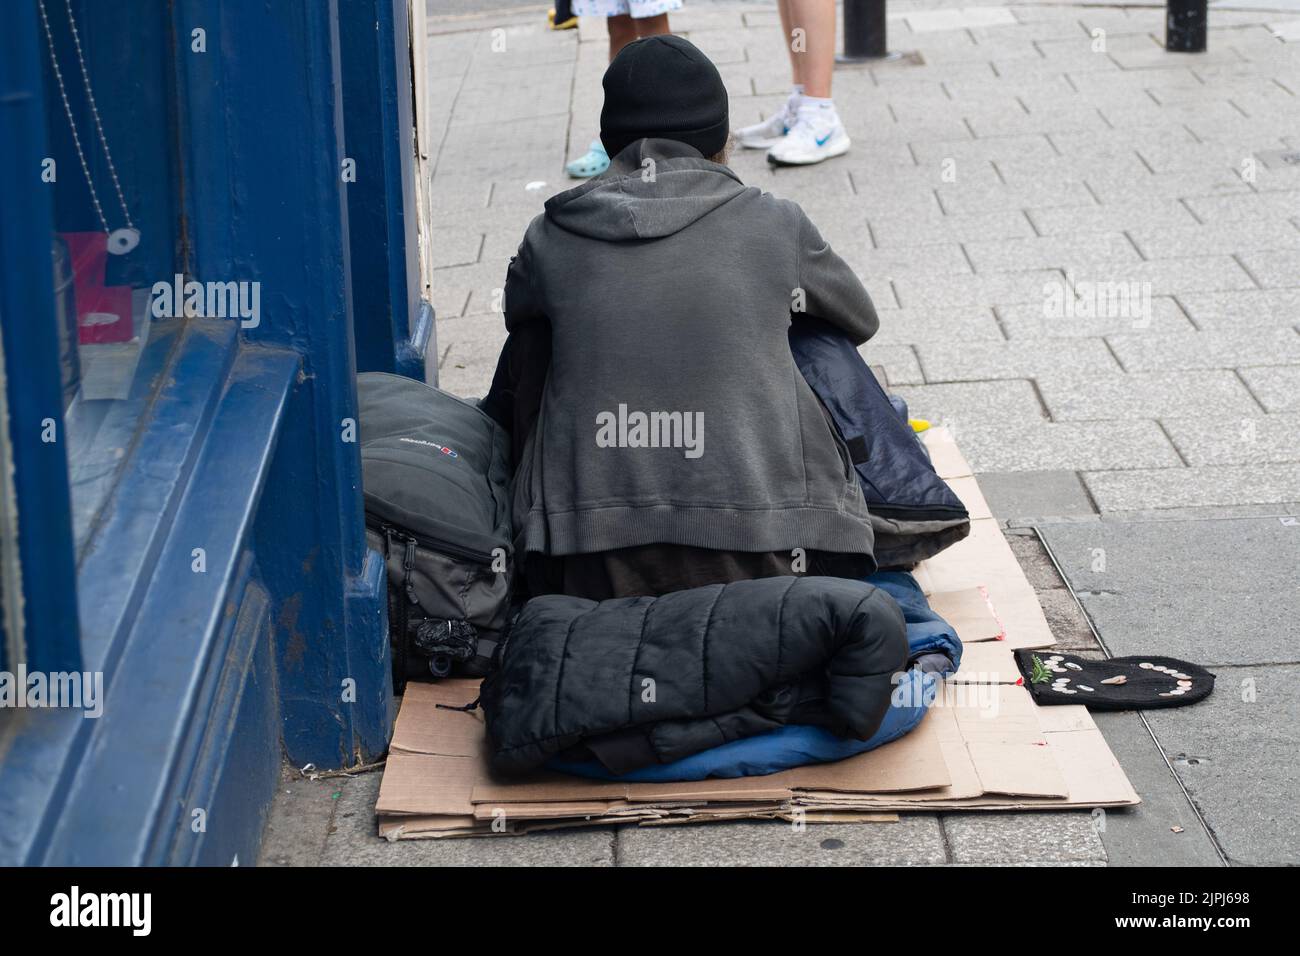 Windsor, Berkshire, UK. 18th August, 2022. People come to beg for money in Windsor particularly on the days when there is a Changing of the Guard and the town is busy. Credit: Maureen McLean/Alamy Stock Photo